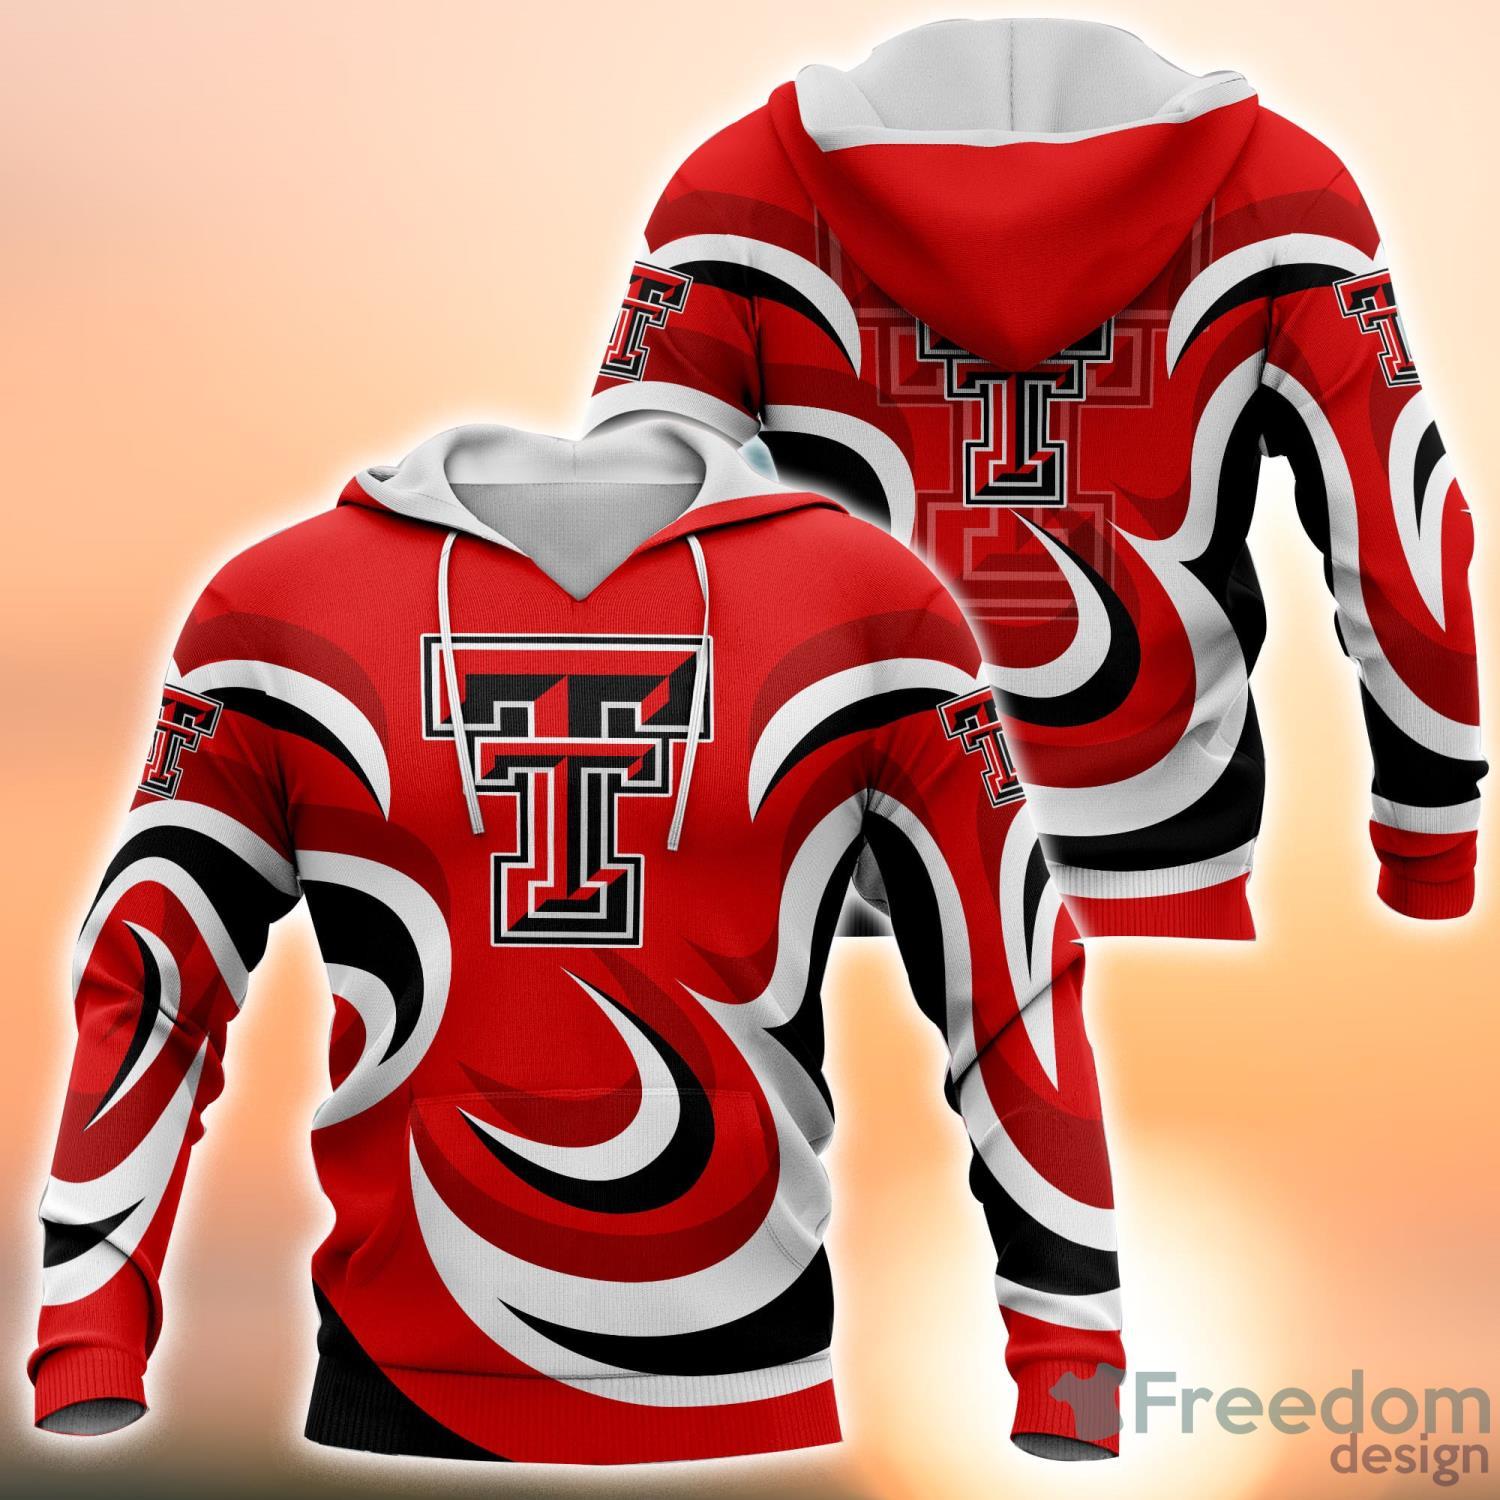 TEXAS TECH RED RAIDERS ROOKIE MOVE ICONIC OVERSIZED FASHION JERSEY